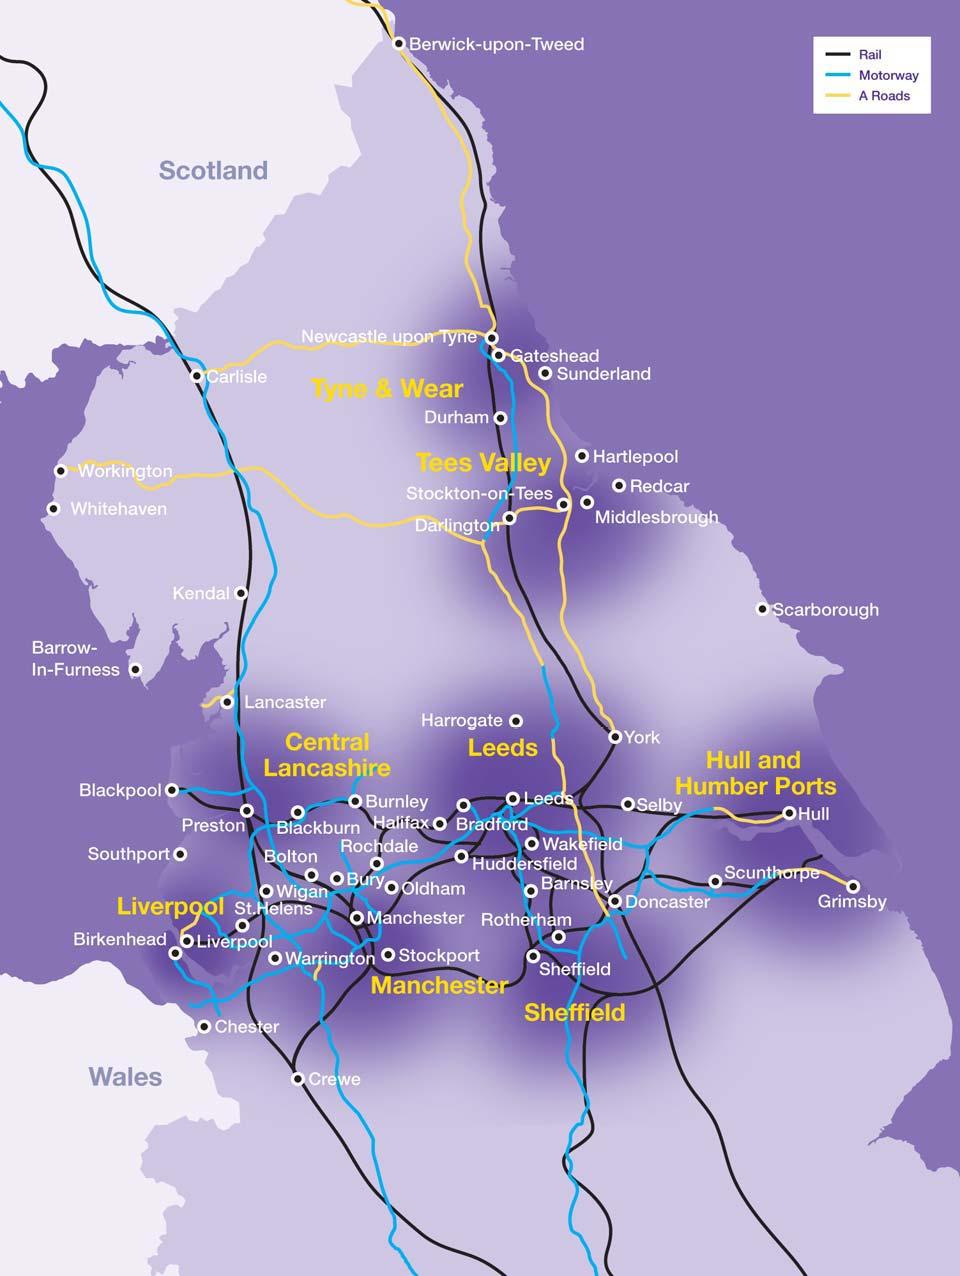 The Northern Way Megalopolis With 8 city regions: Liverpool, Manchester, Leeds Sheffield, Hull,